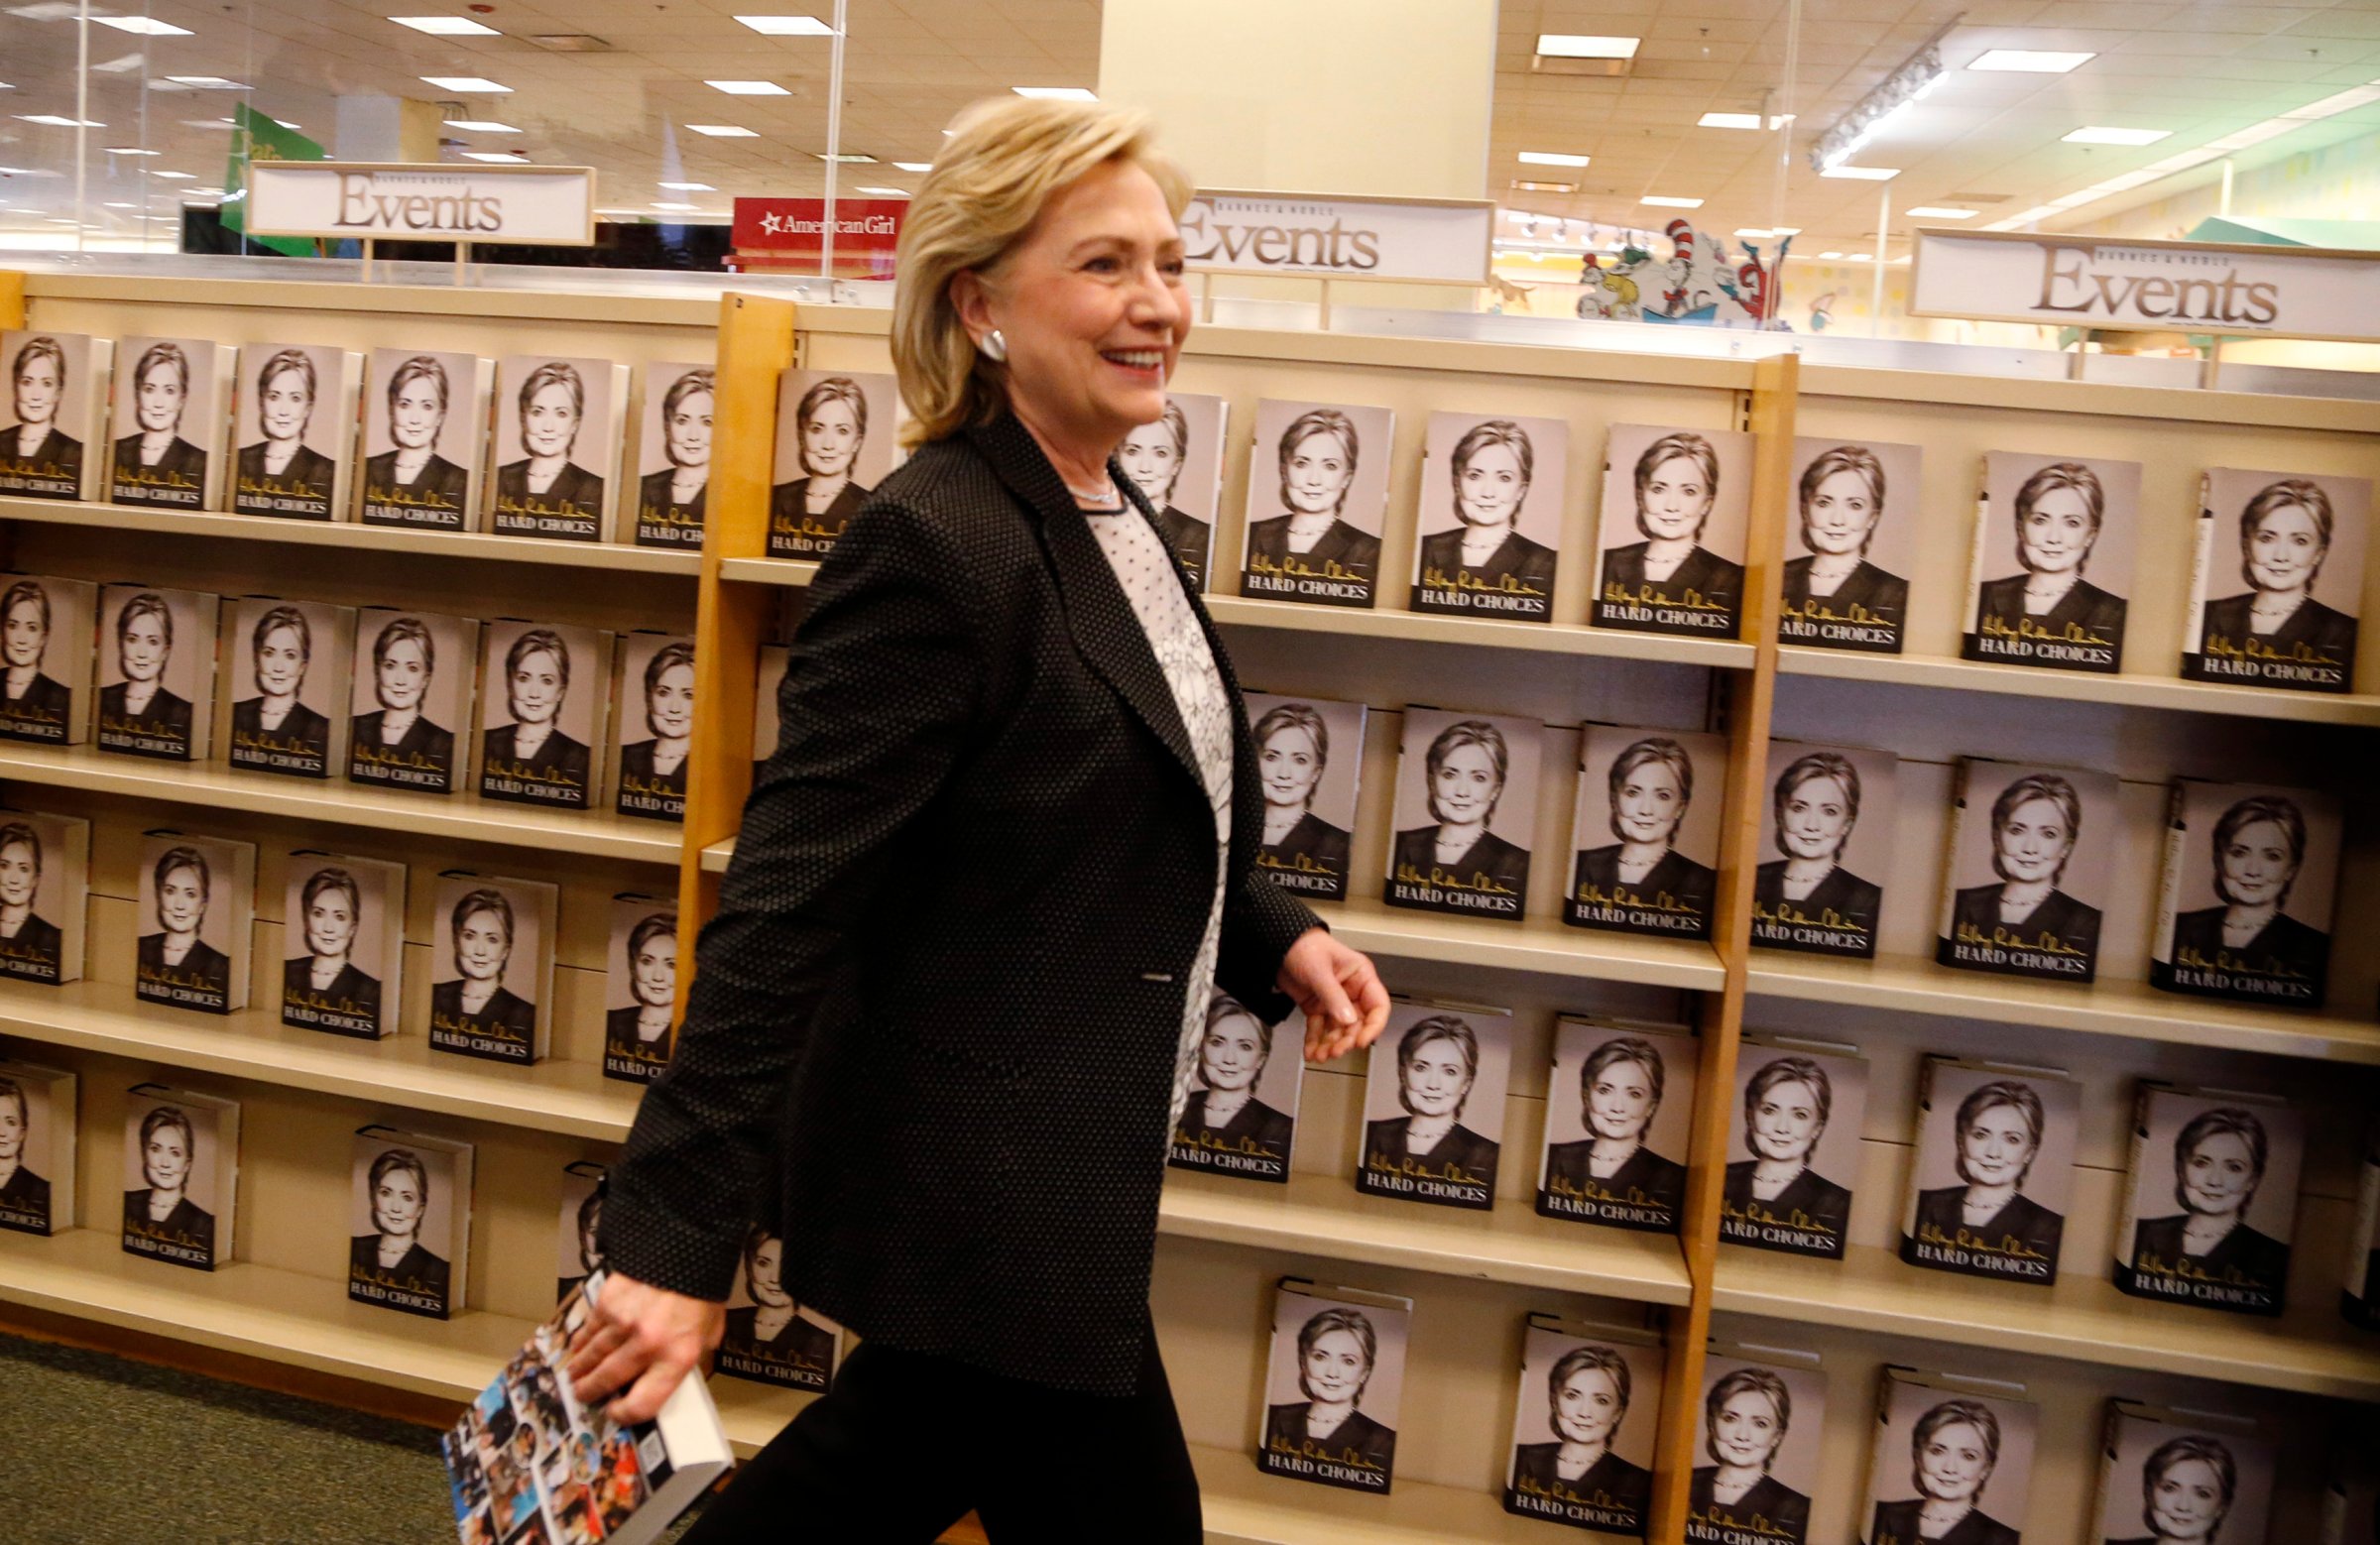 Former U.S. Secretary of State Hillary Clinton arrives to sign copies of her book "Hard Choices" at a Barnes & Noble book store in Los Angeles